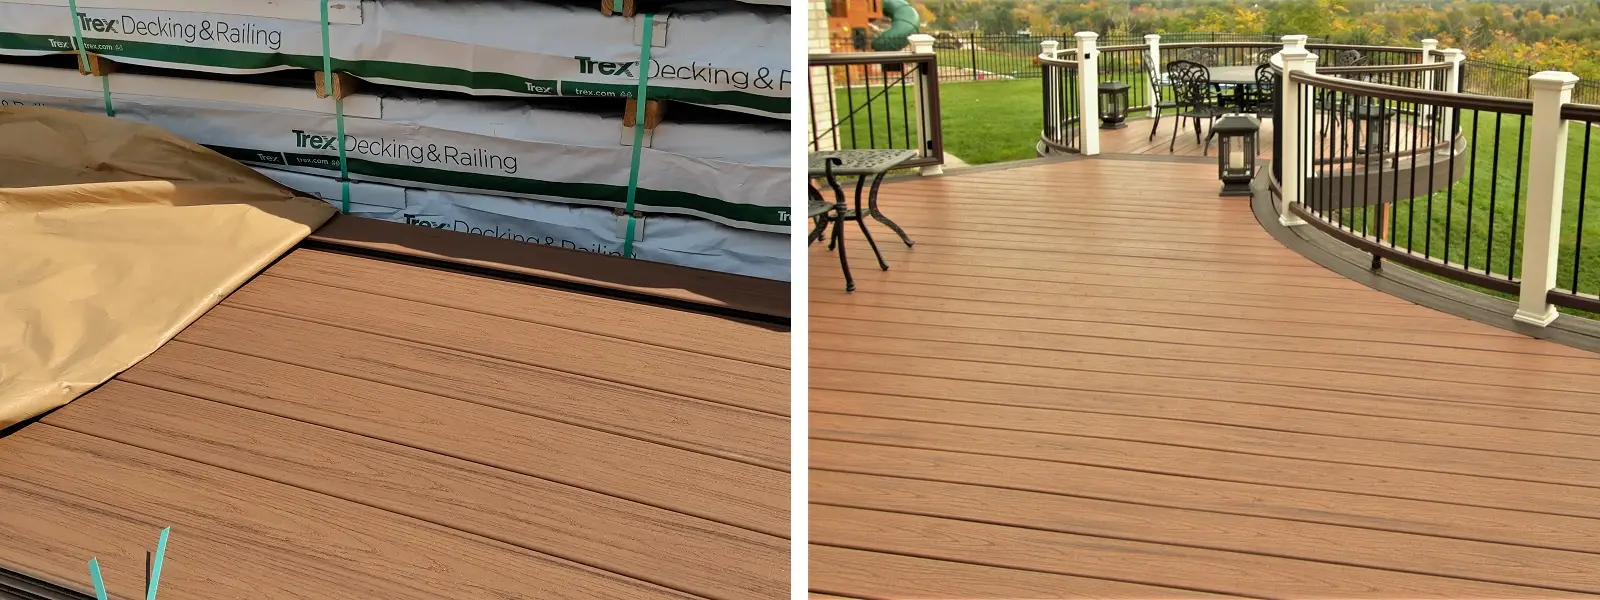 Trex Transcend decking materials stocked at Fence & Deck Supply with a composite image of an installed deck